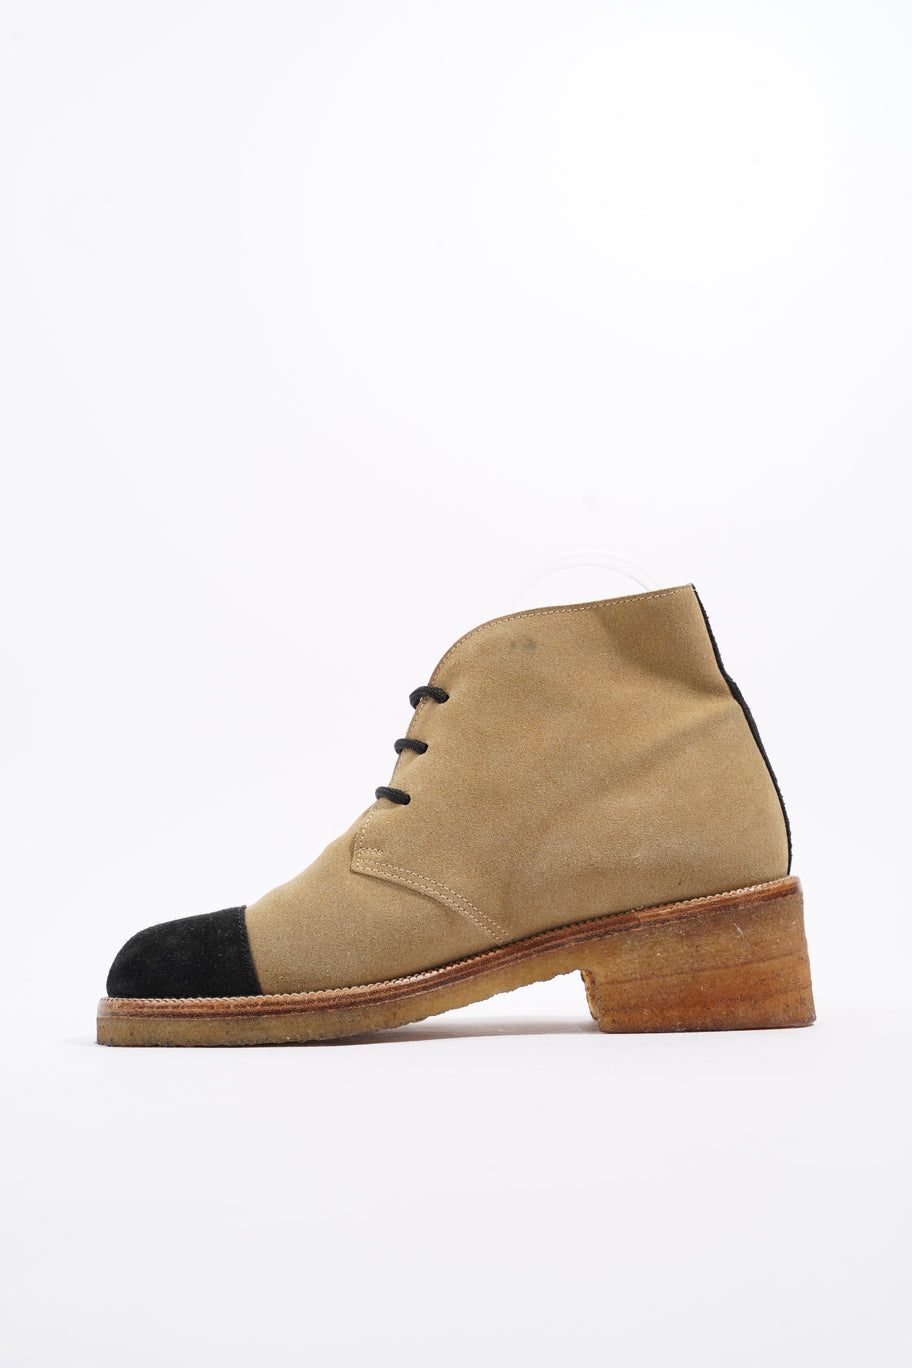 Ankle Boot Beige Suede EU 37 UK 4 Image 3